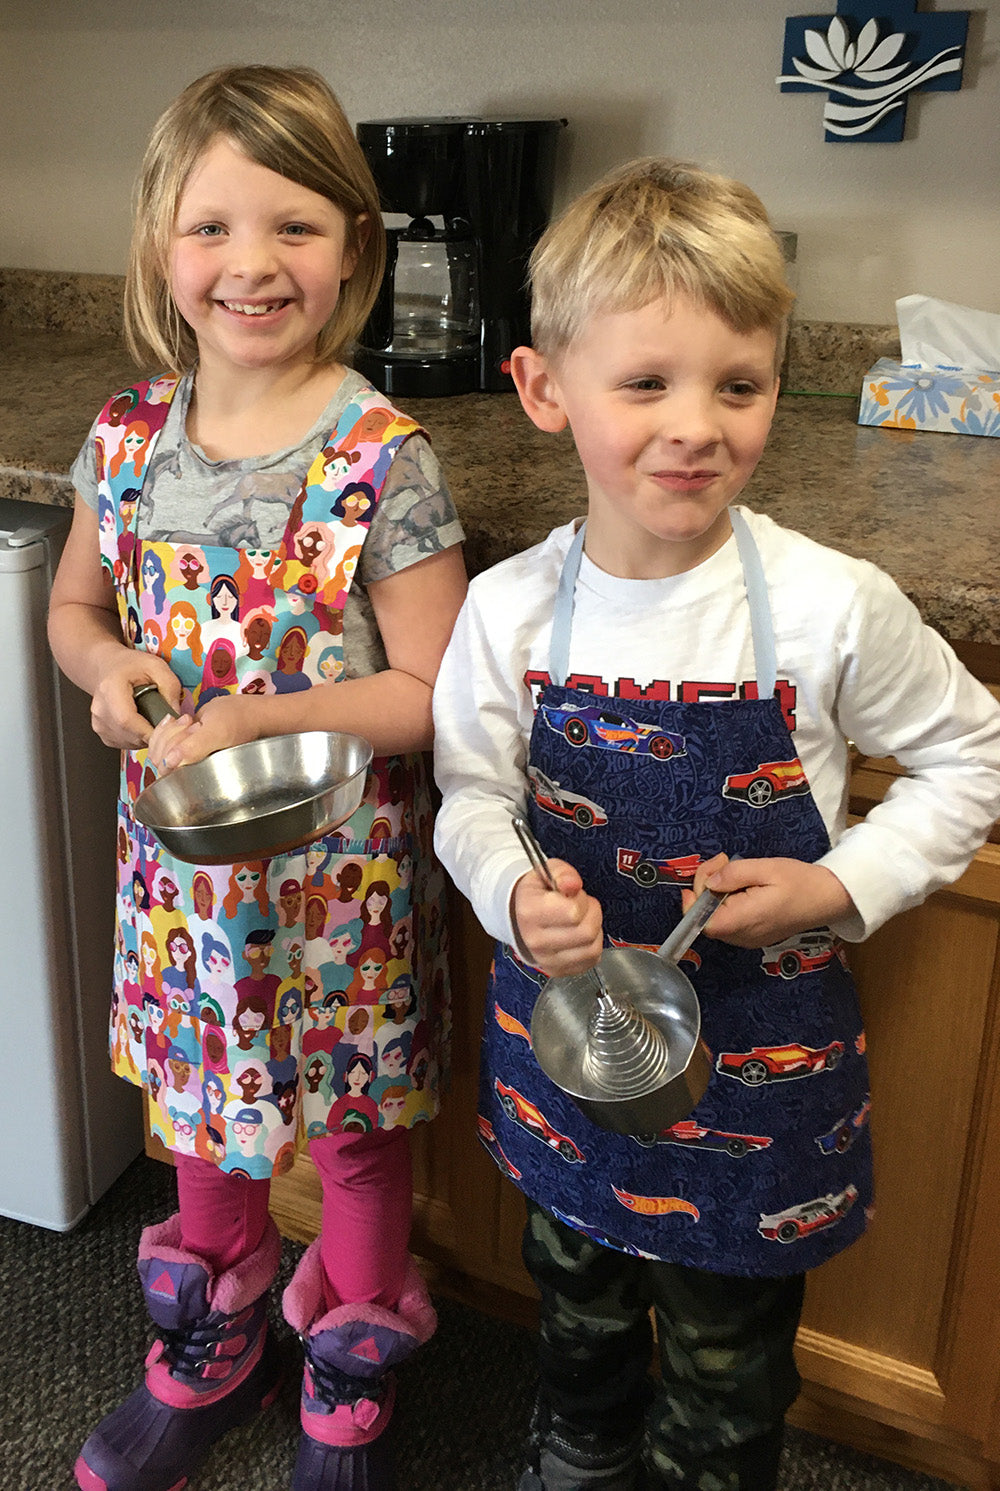 Little Sister & Brother Apron Pattern